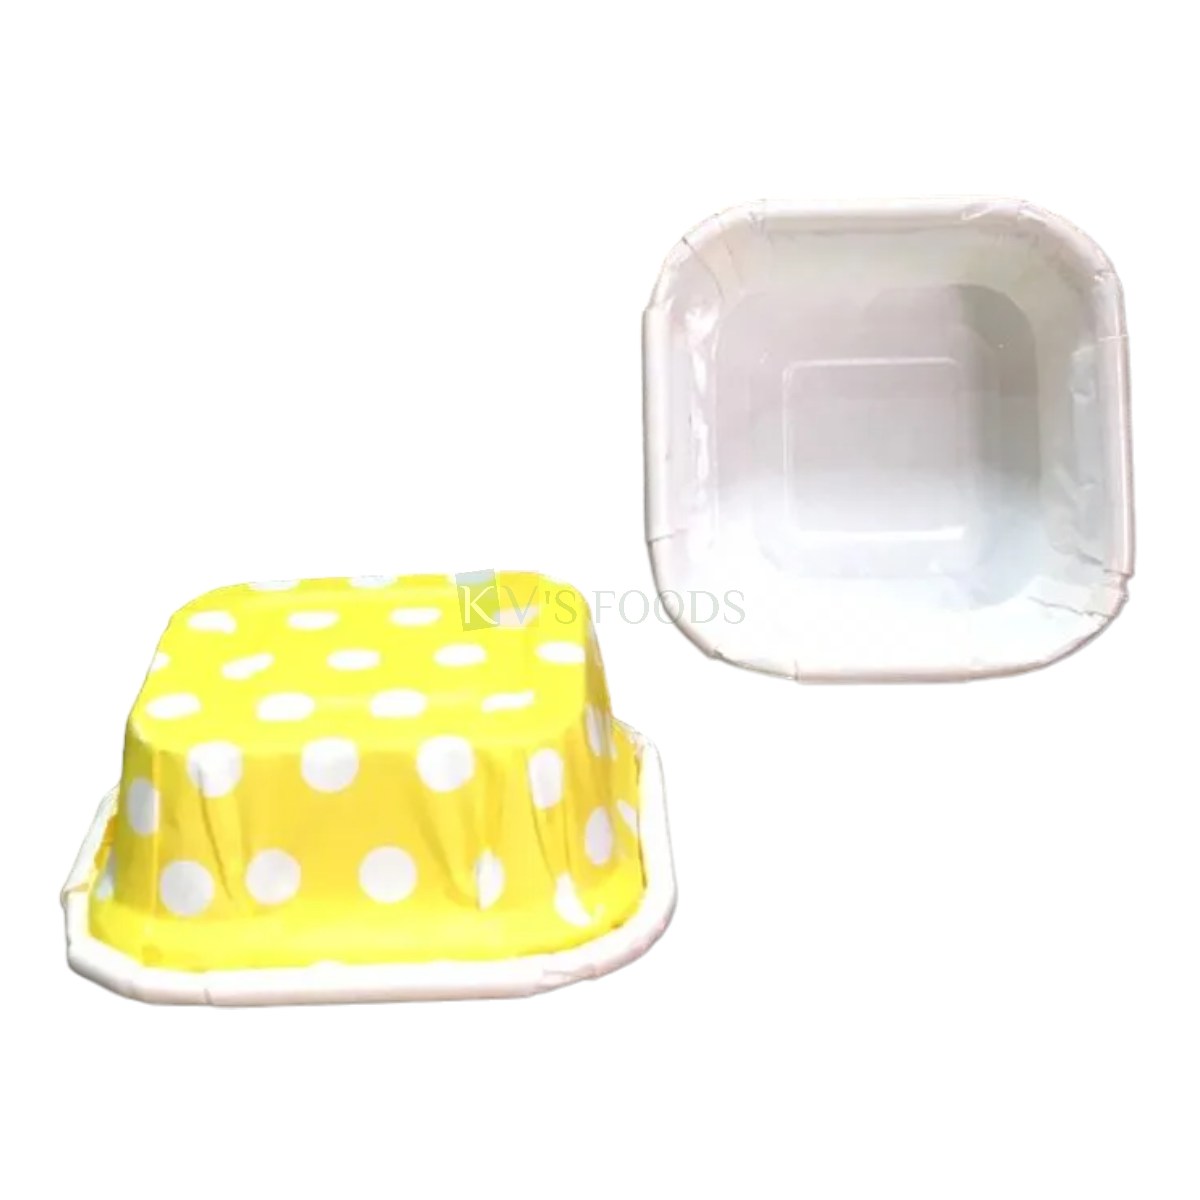 10 PC Eco Friendly Square Polka Dots Yellow Colour Mini Dry Cake Paper Small Mould Bake and Serve Size 85x85x40 mm Disposable Gift Tray Bakeable Paper Bakeware Mould for Plum Cakes Mini Brownie Cakes